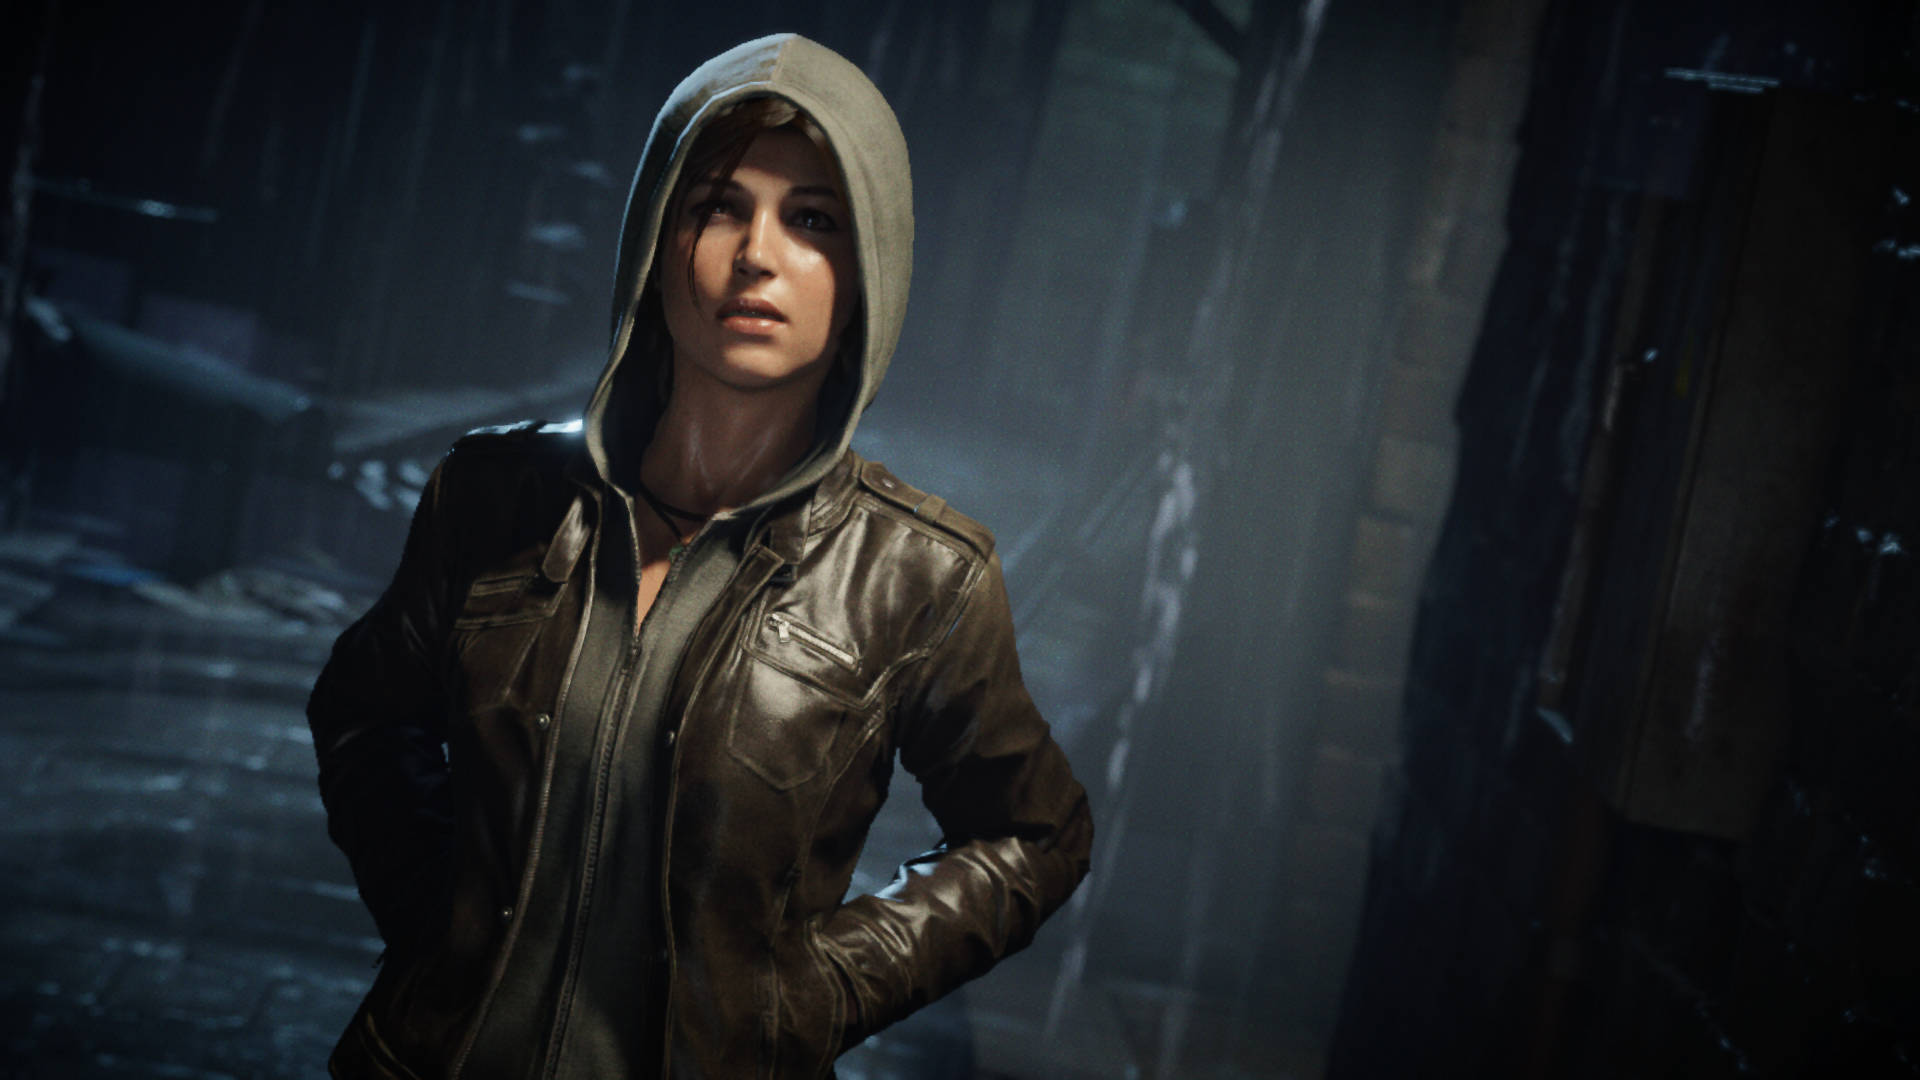 The SideQuest November 12, 2015: Rise of the Tomb Raider, Assassin’s Creed Syndicate, Fallout 4